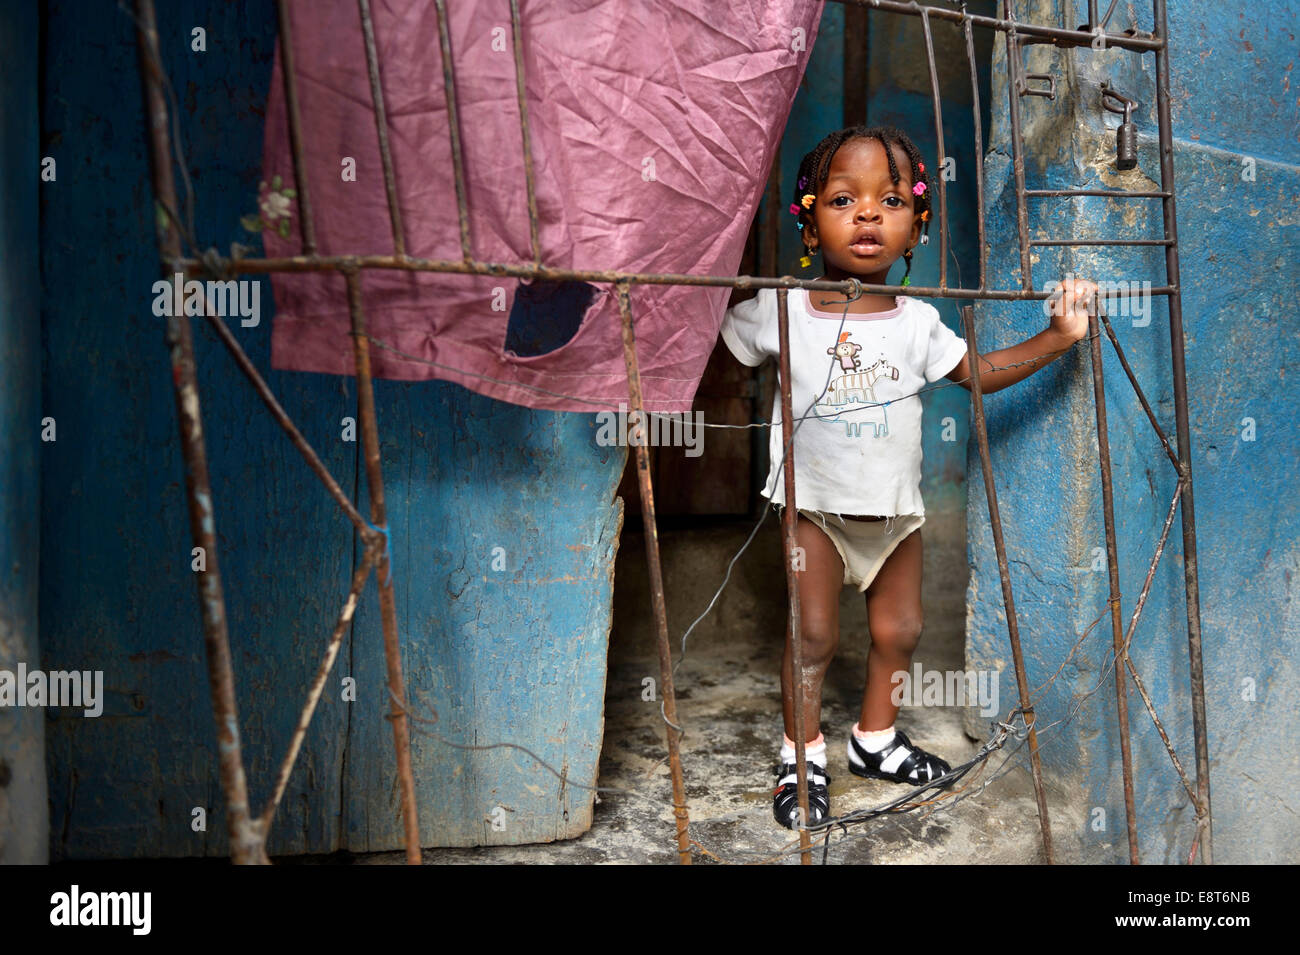 Girl behind a fence in a doorway, Fort National slum, Port-au-Prince, Haiti Stock Photo